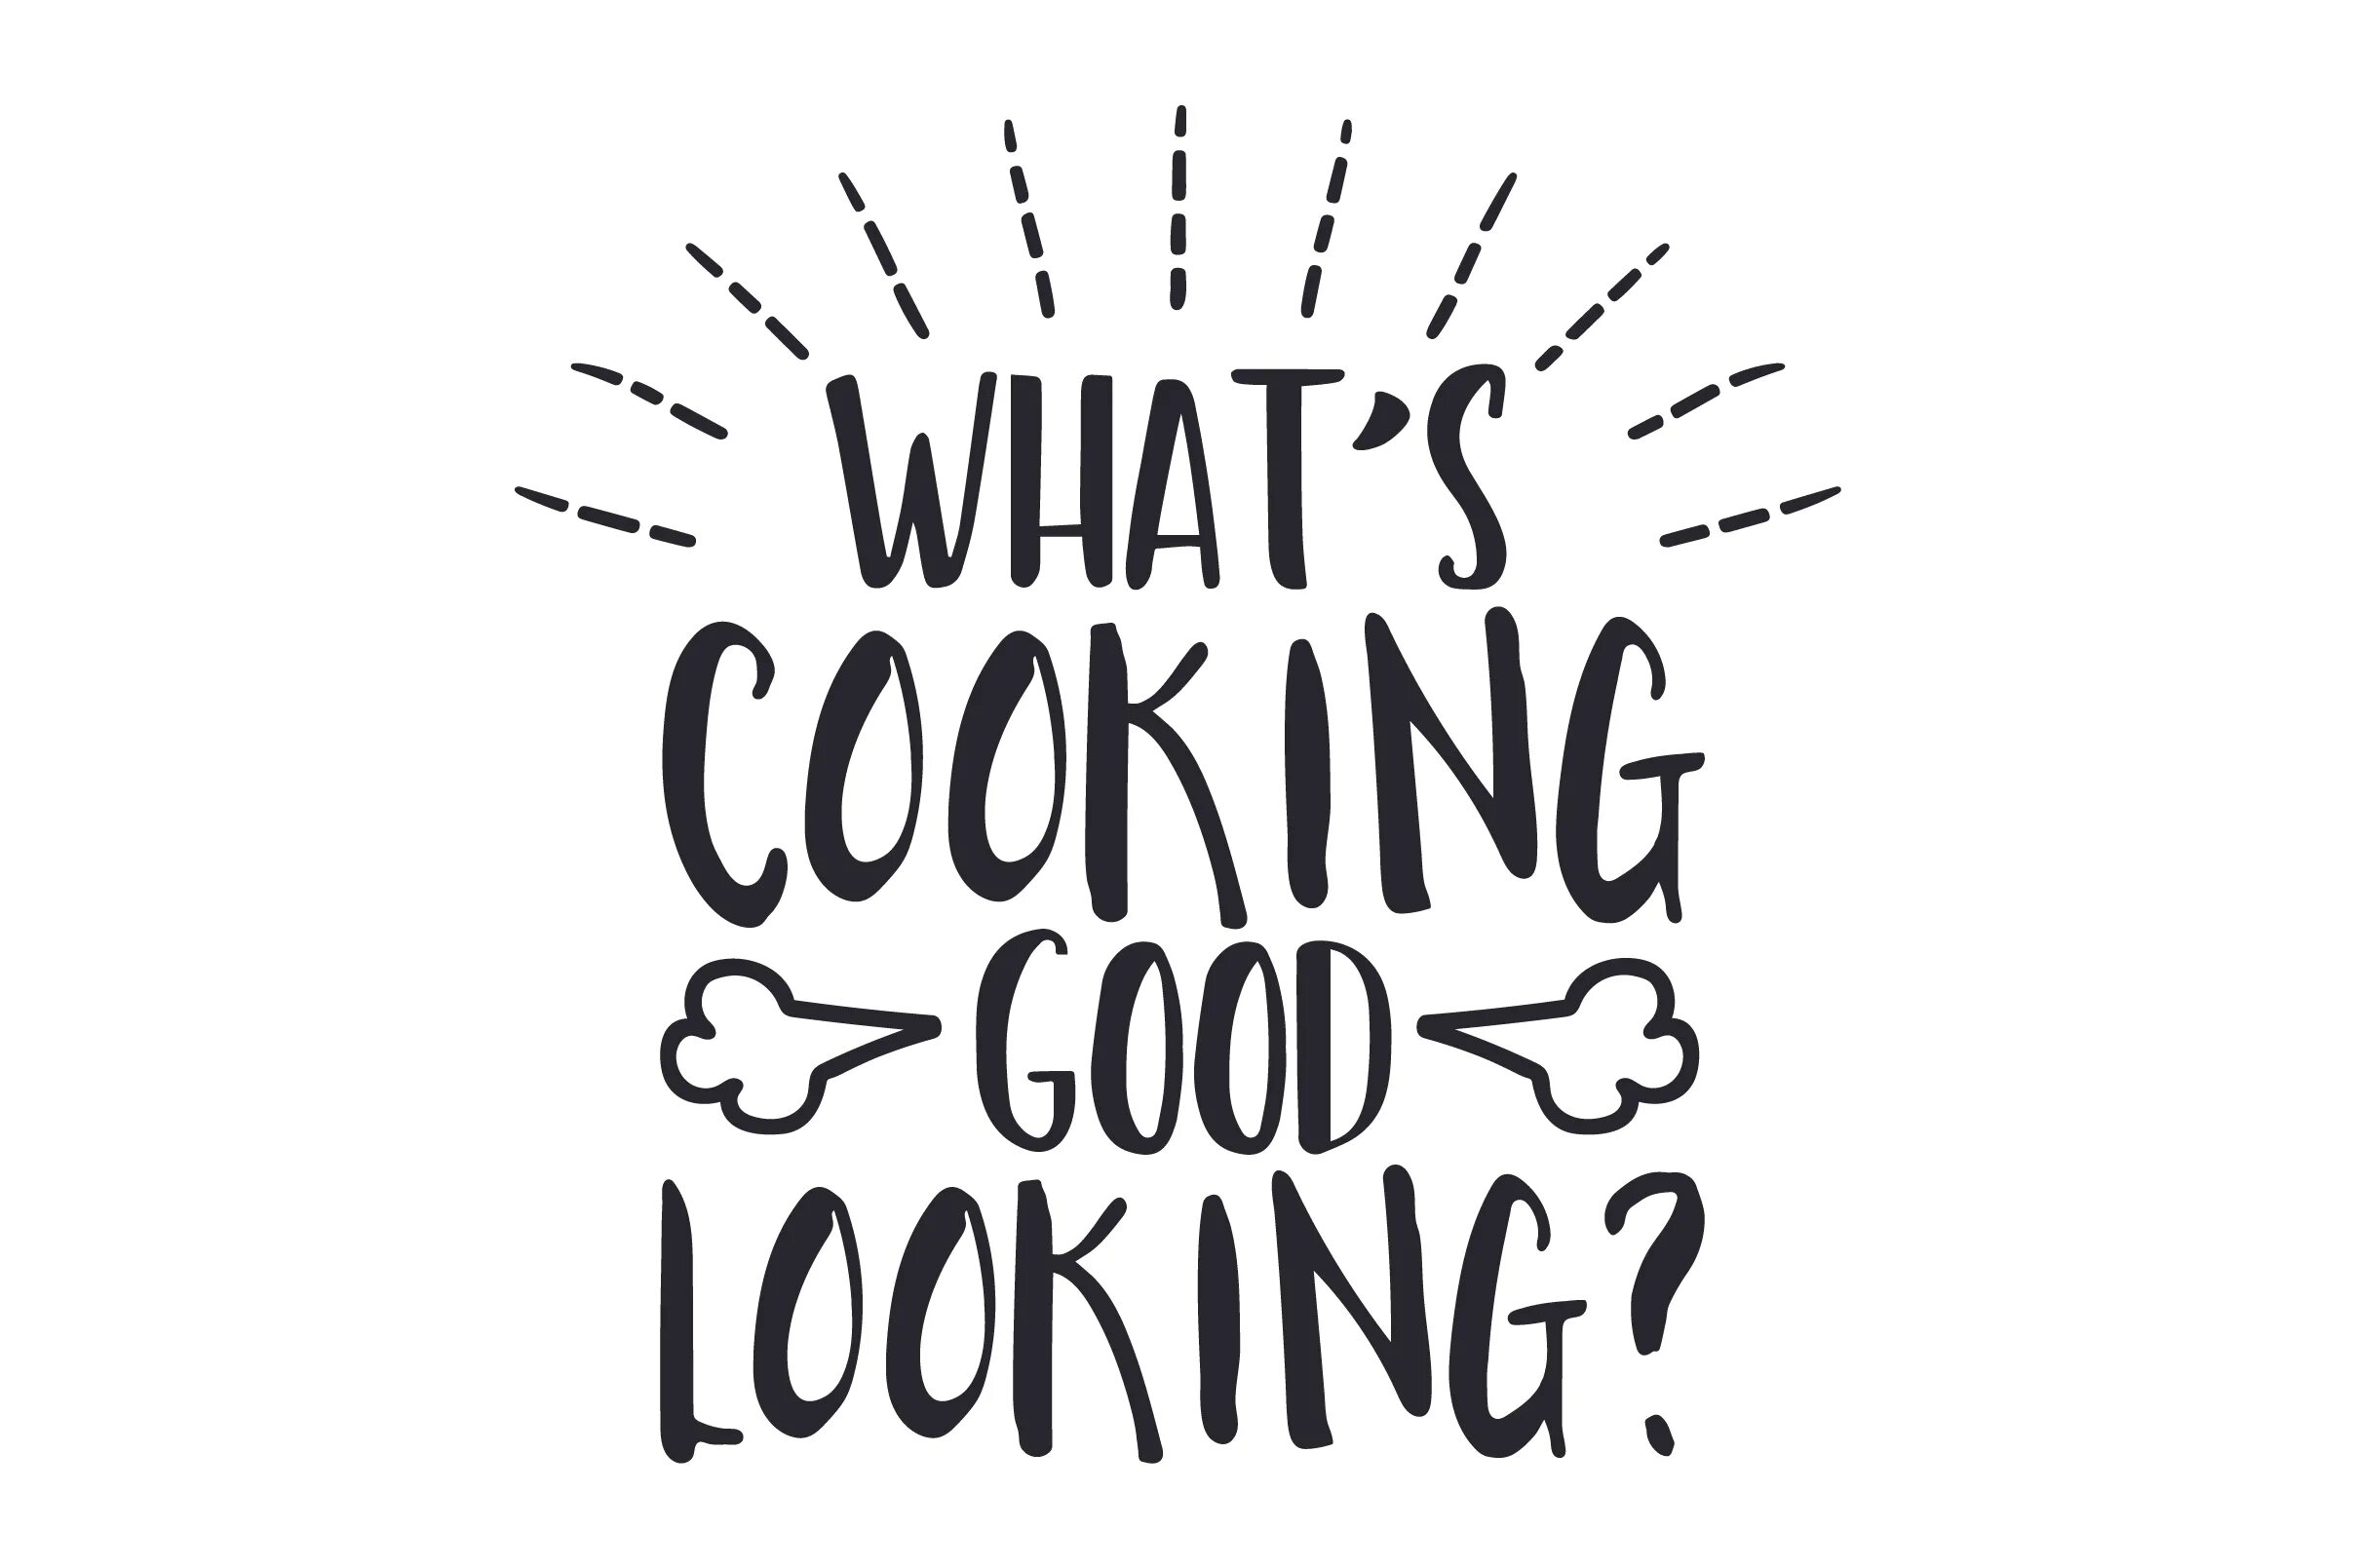 Good what s up. Кукинг Гуд лукинг. What's Cooking good. What Cooking good looking. Nice Cooking good looking.